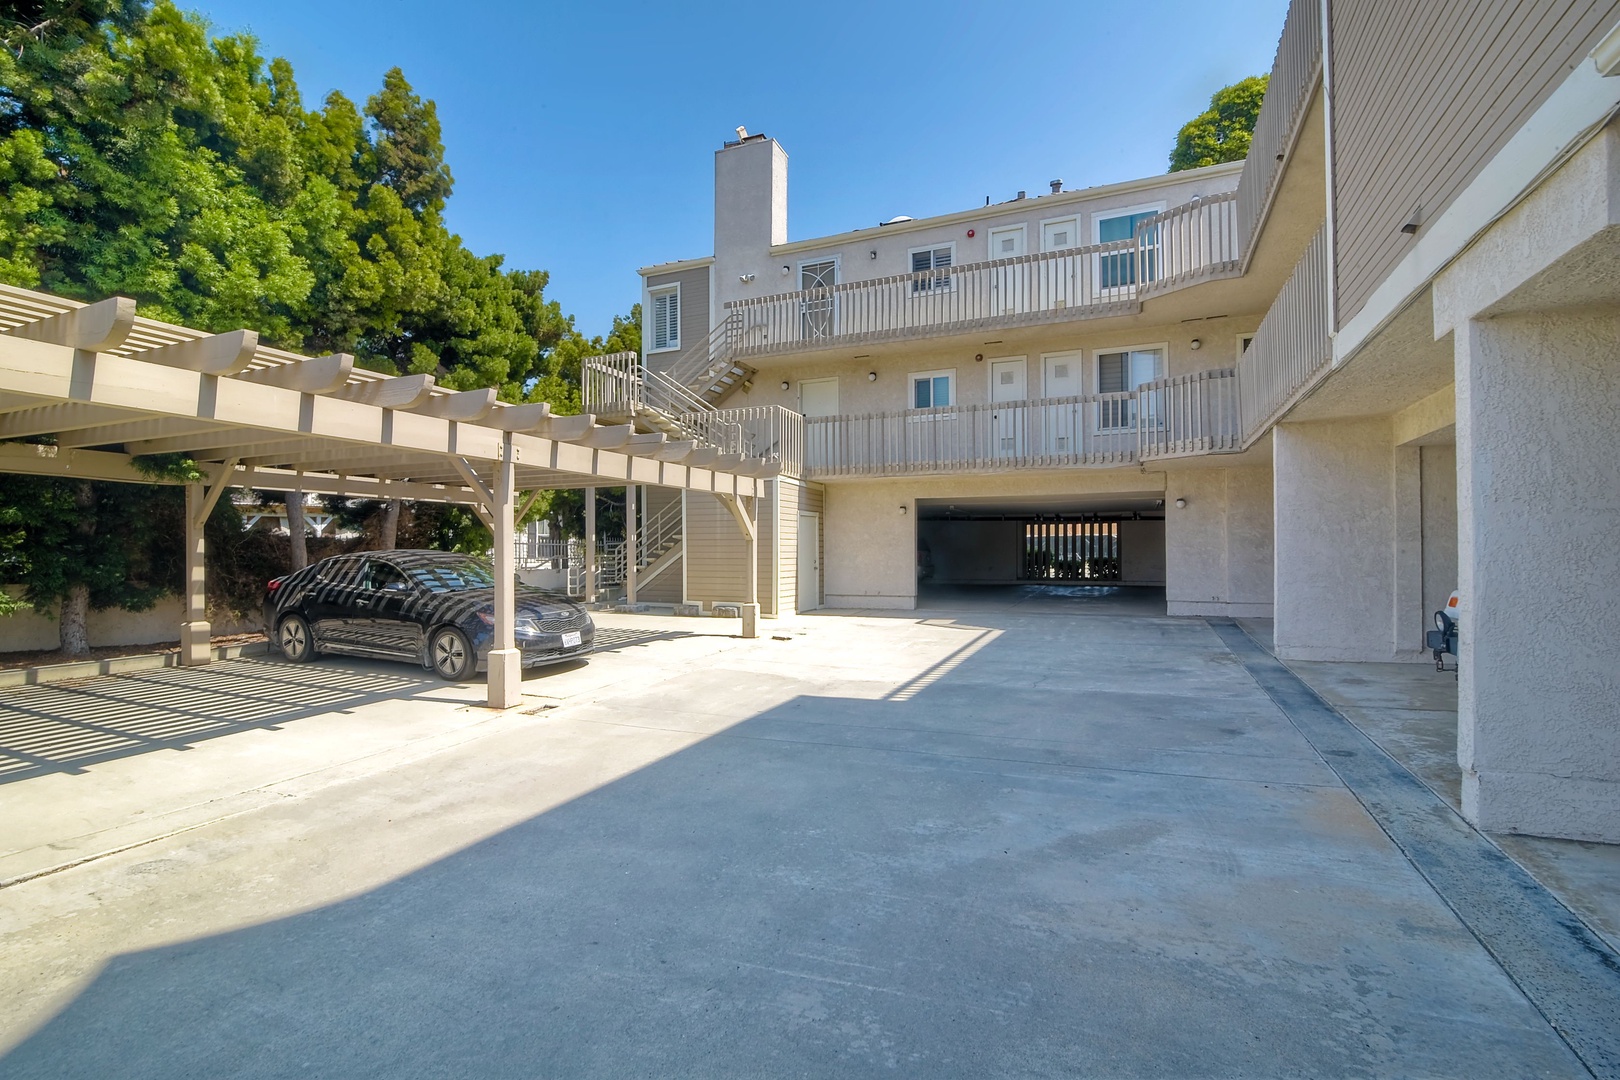 This unit includes the convenience of one garage parking space